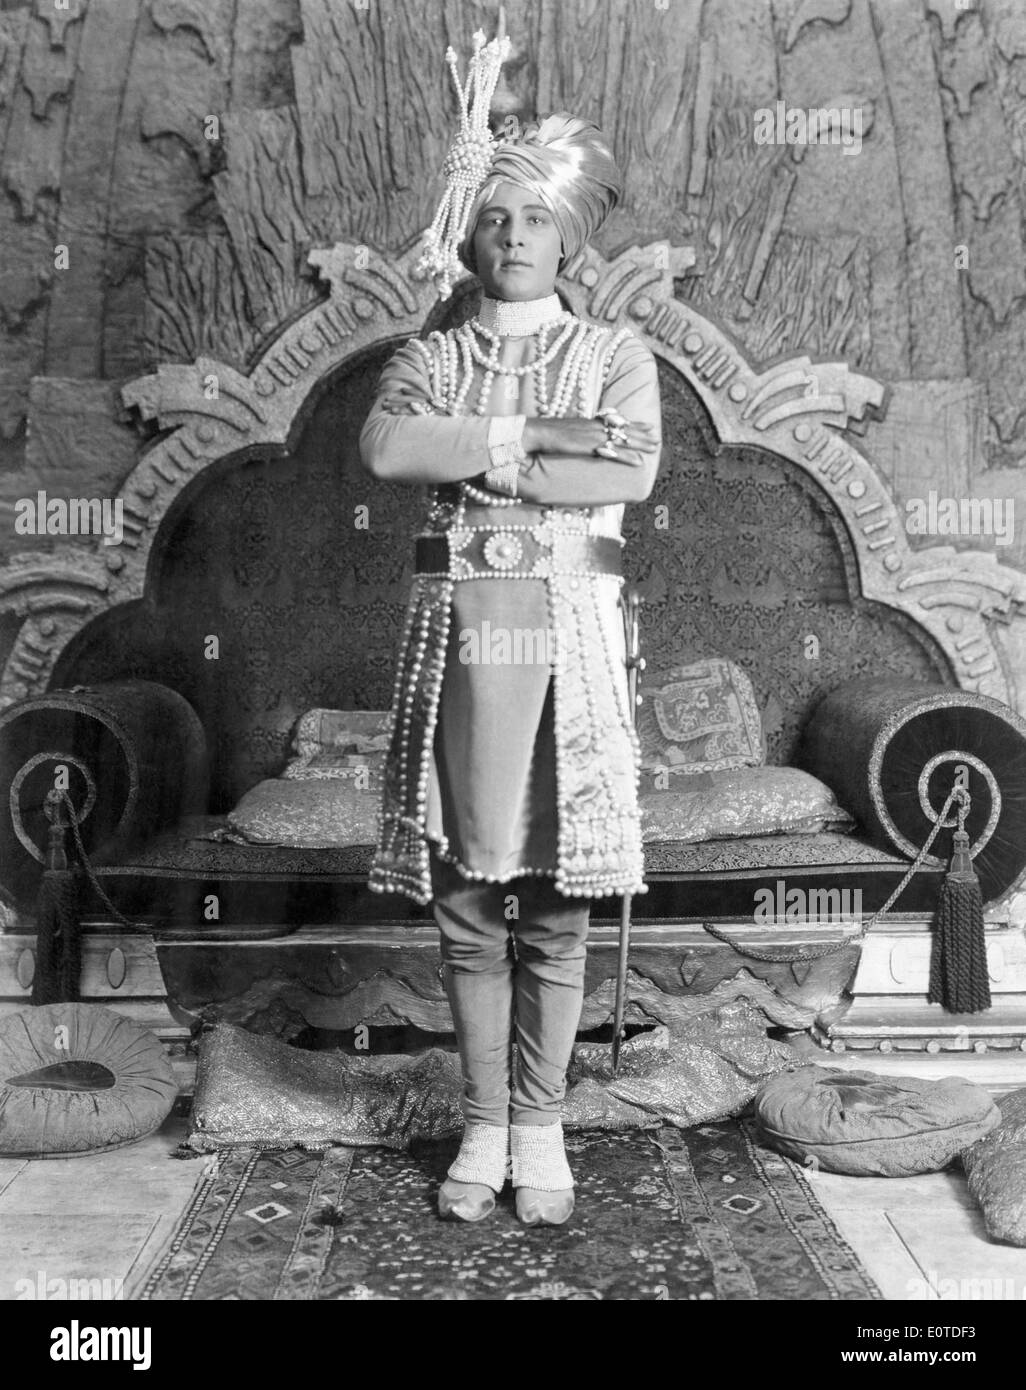 Rudolph Valentino, on-set of the Silent Film, 'The Young Rajah', 1922 Stock Photo